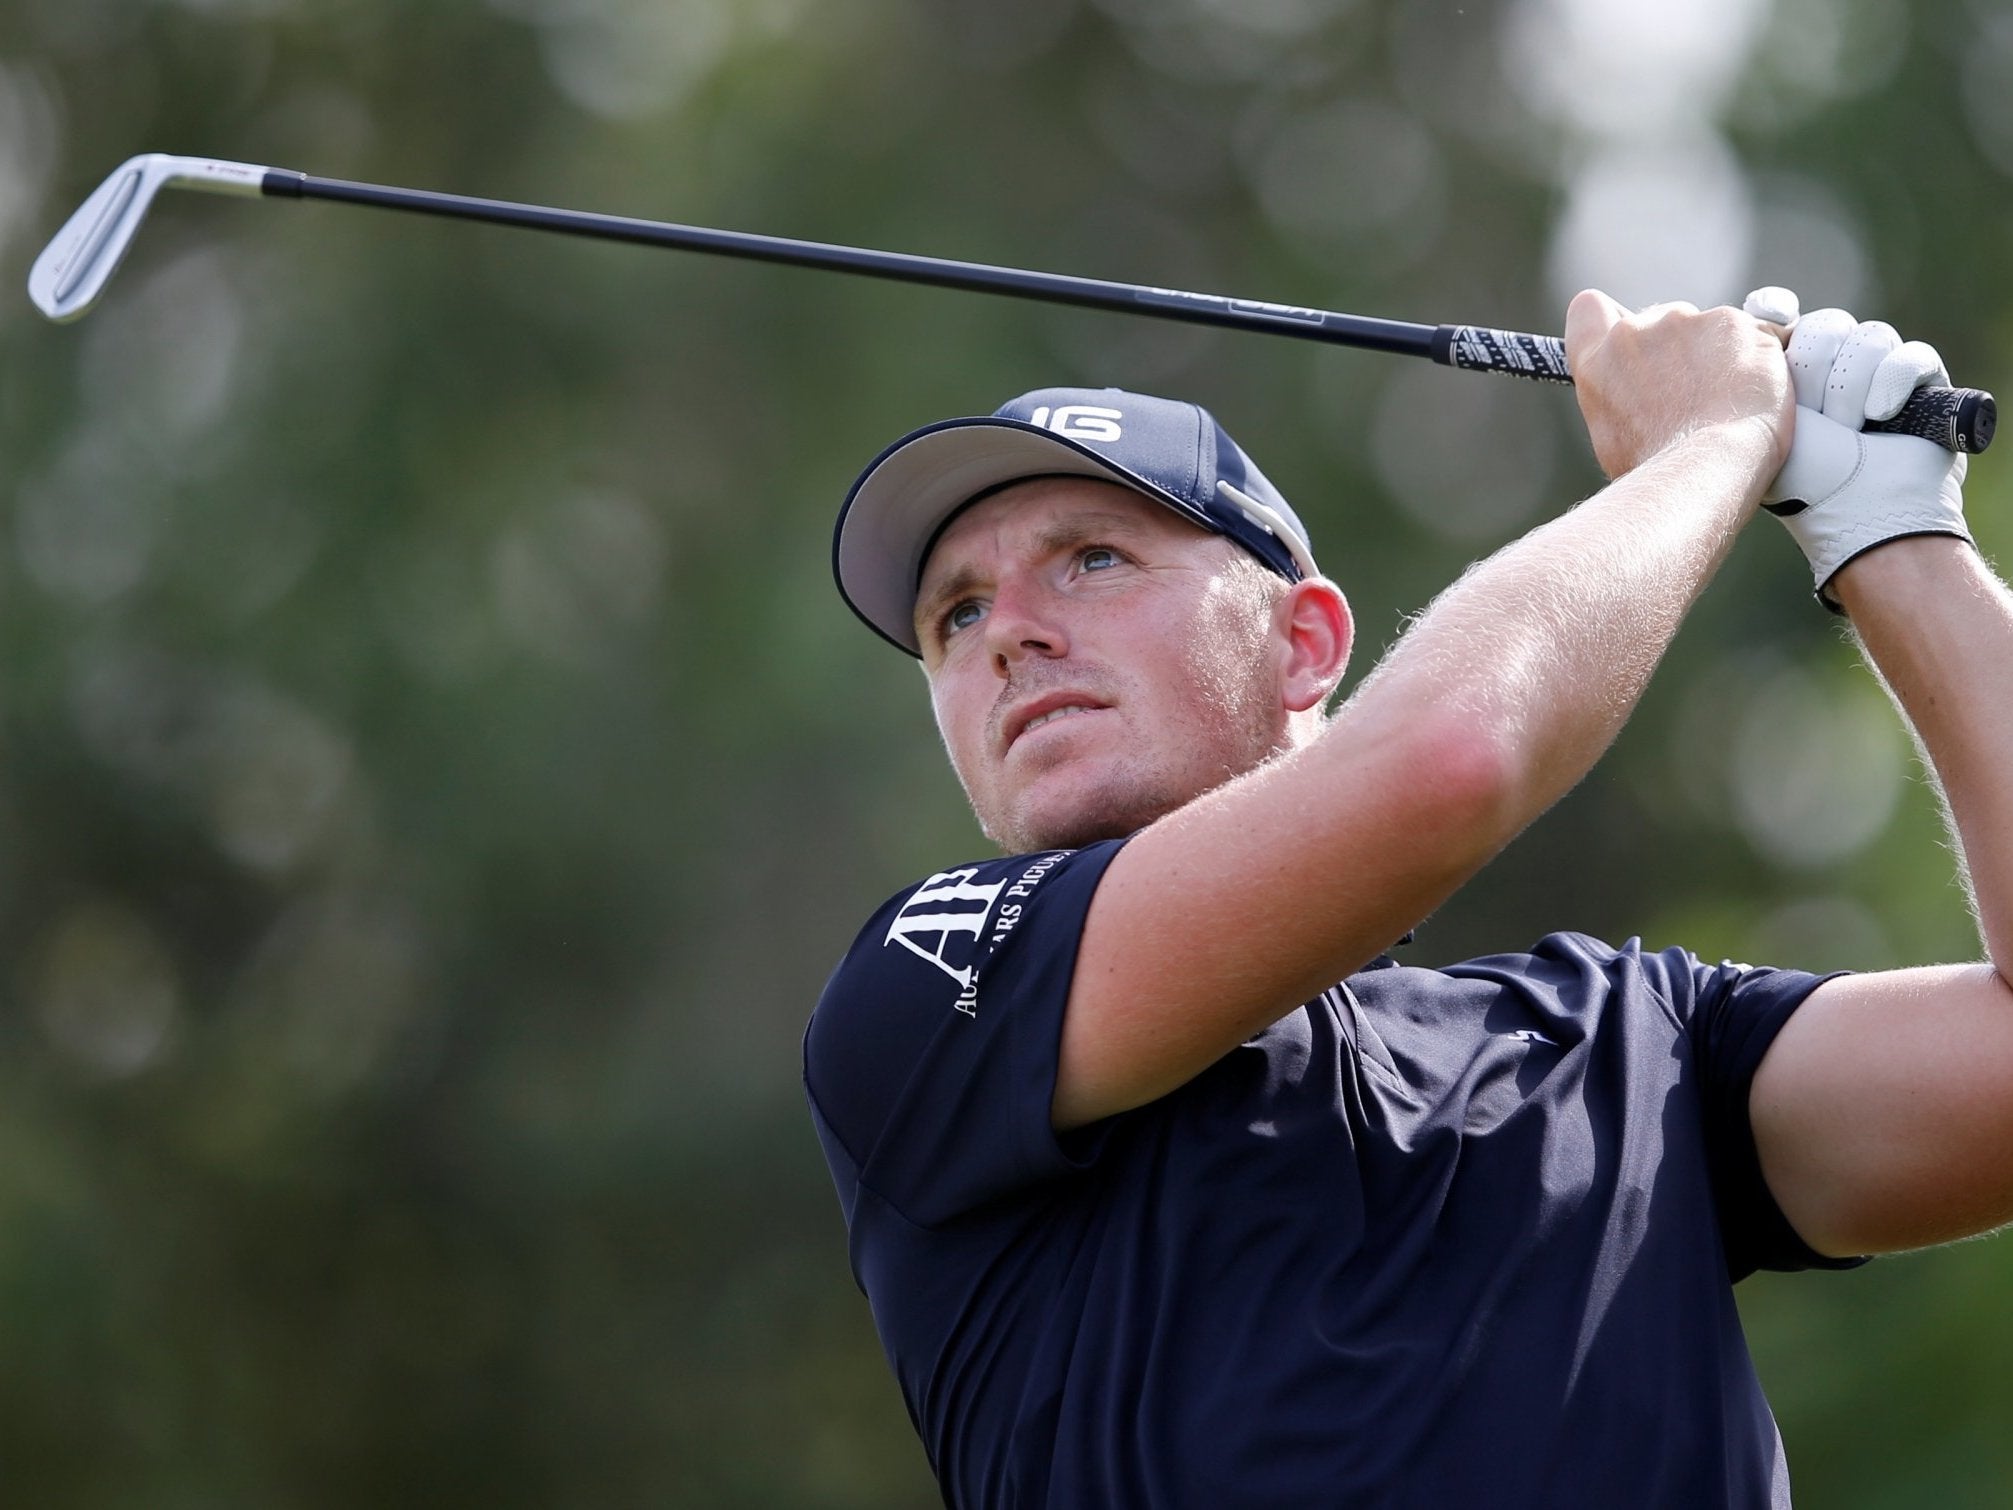 Wallace leads after two rounds in Dubai